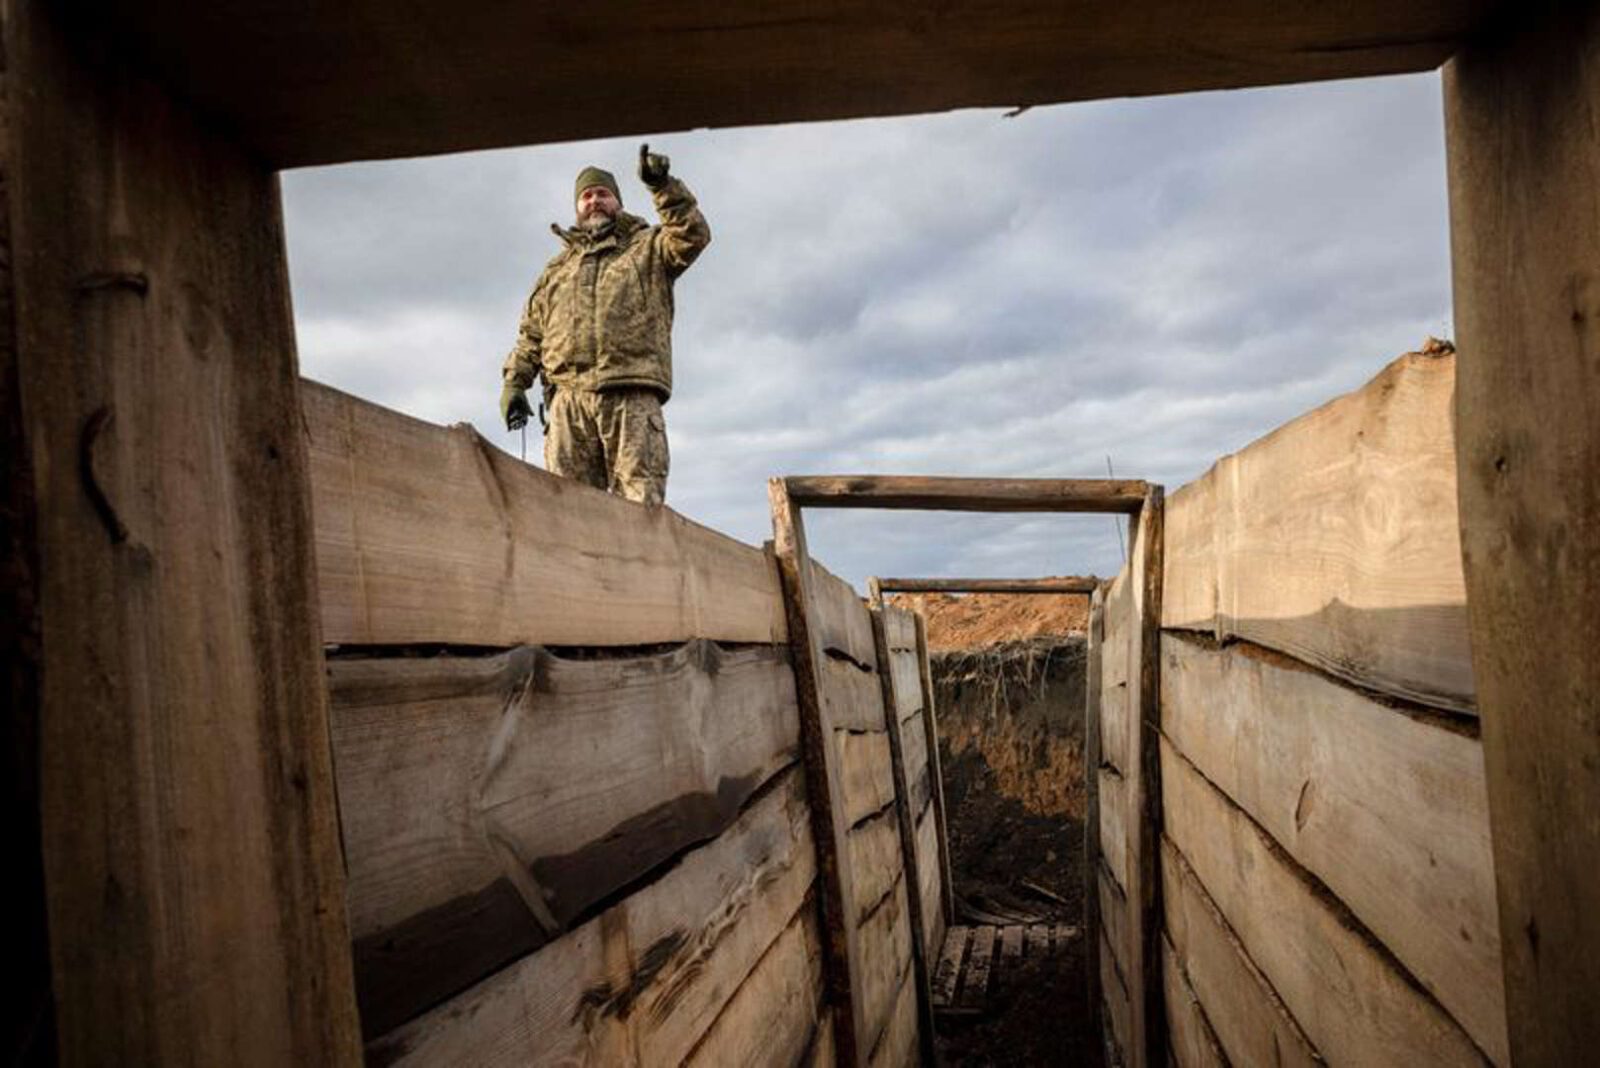 Ukraine builds barricades and digs trenches in shift in defense focus